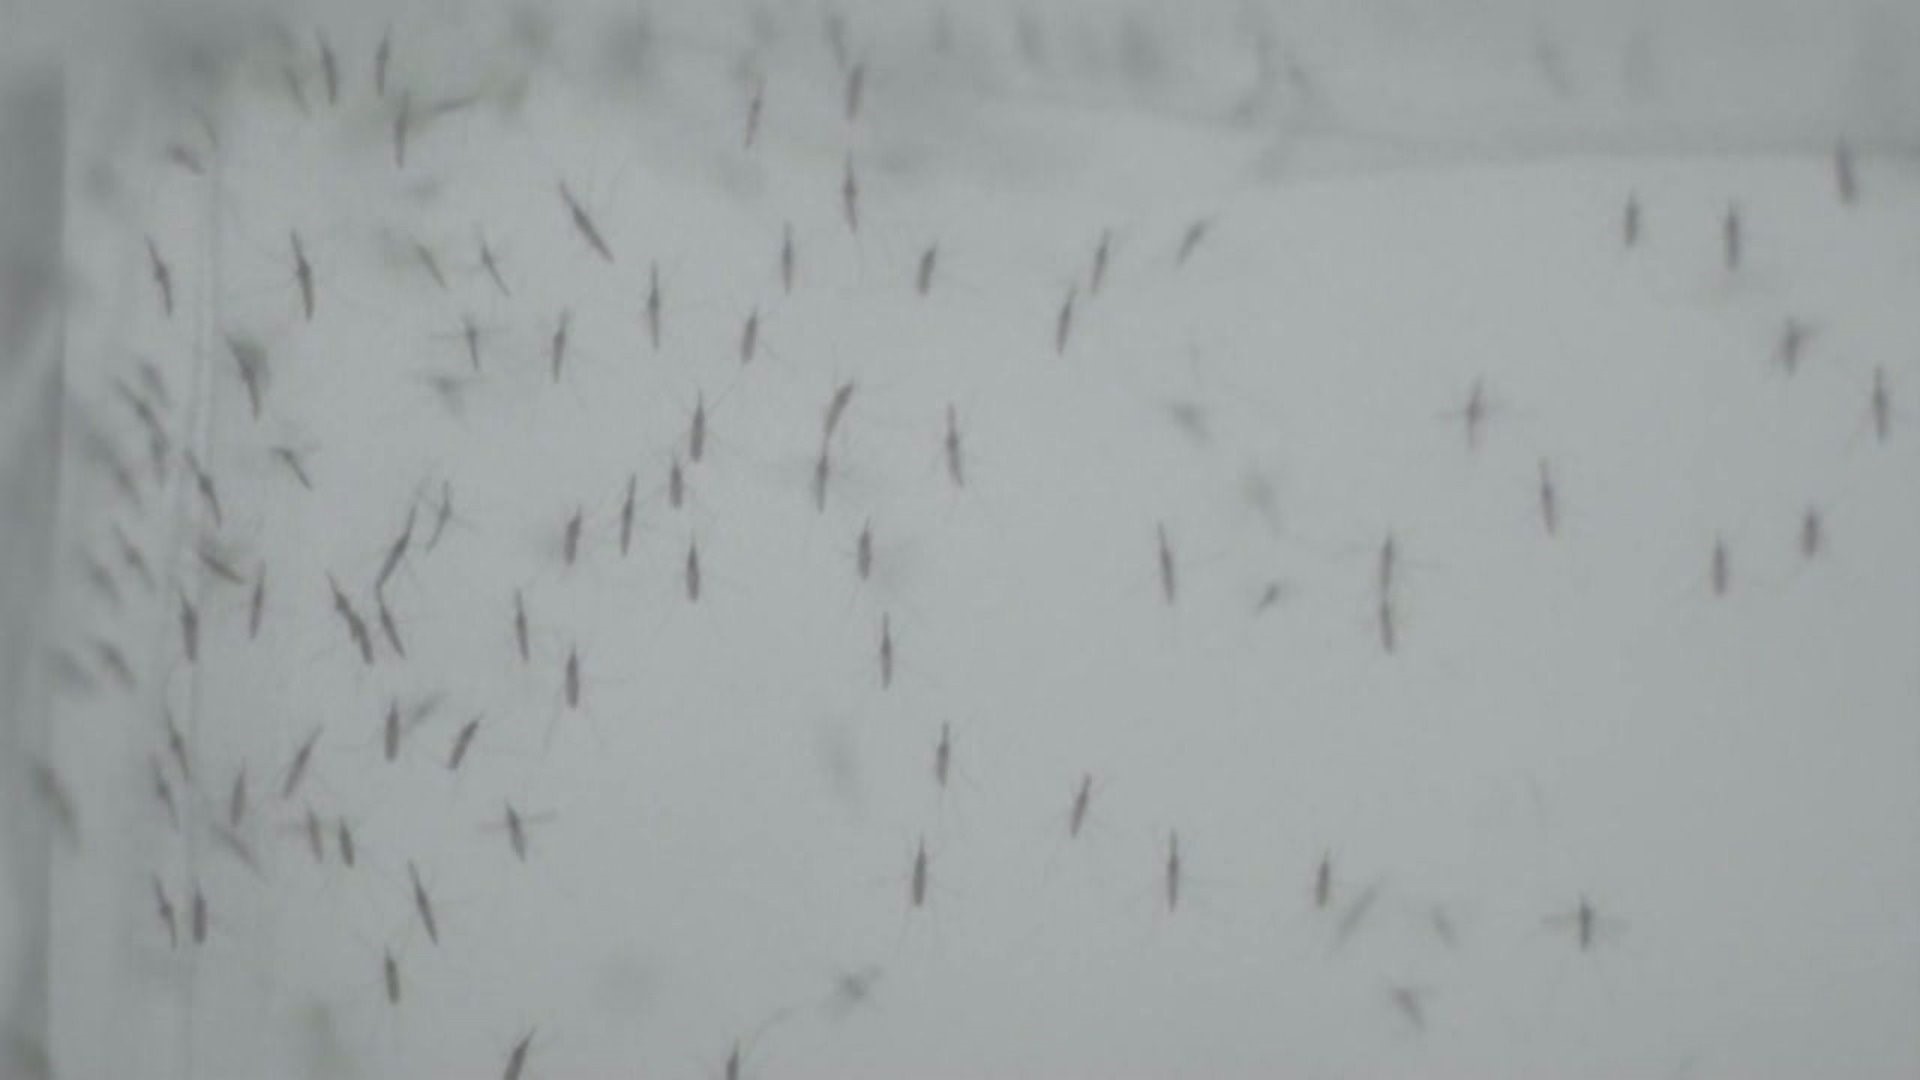 Experts explain why mosquitoes may seem worse this year